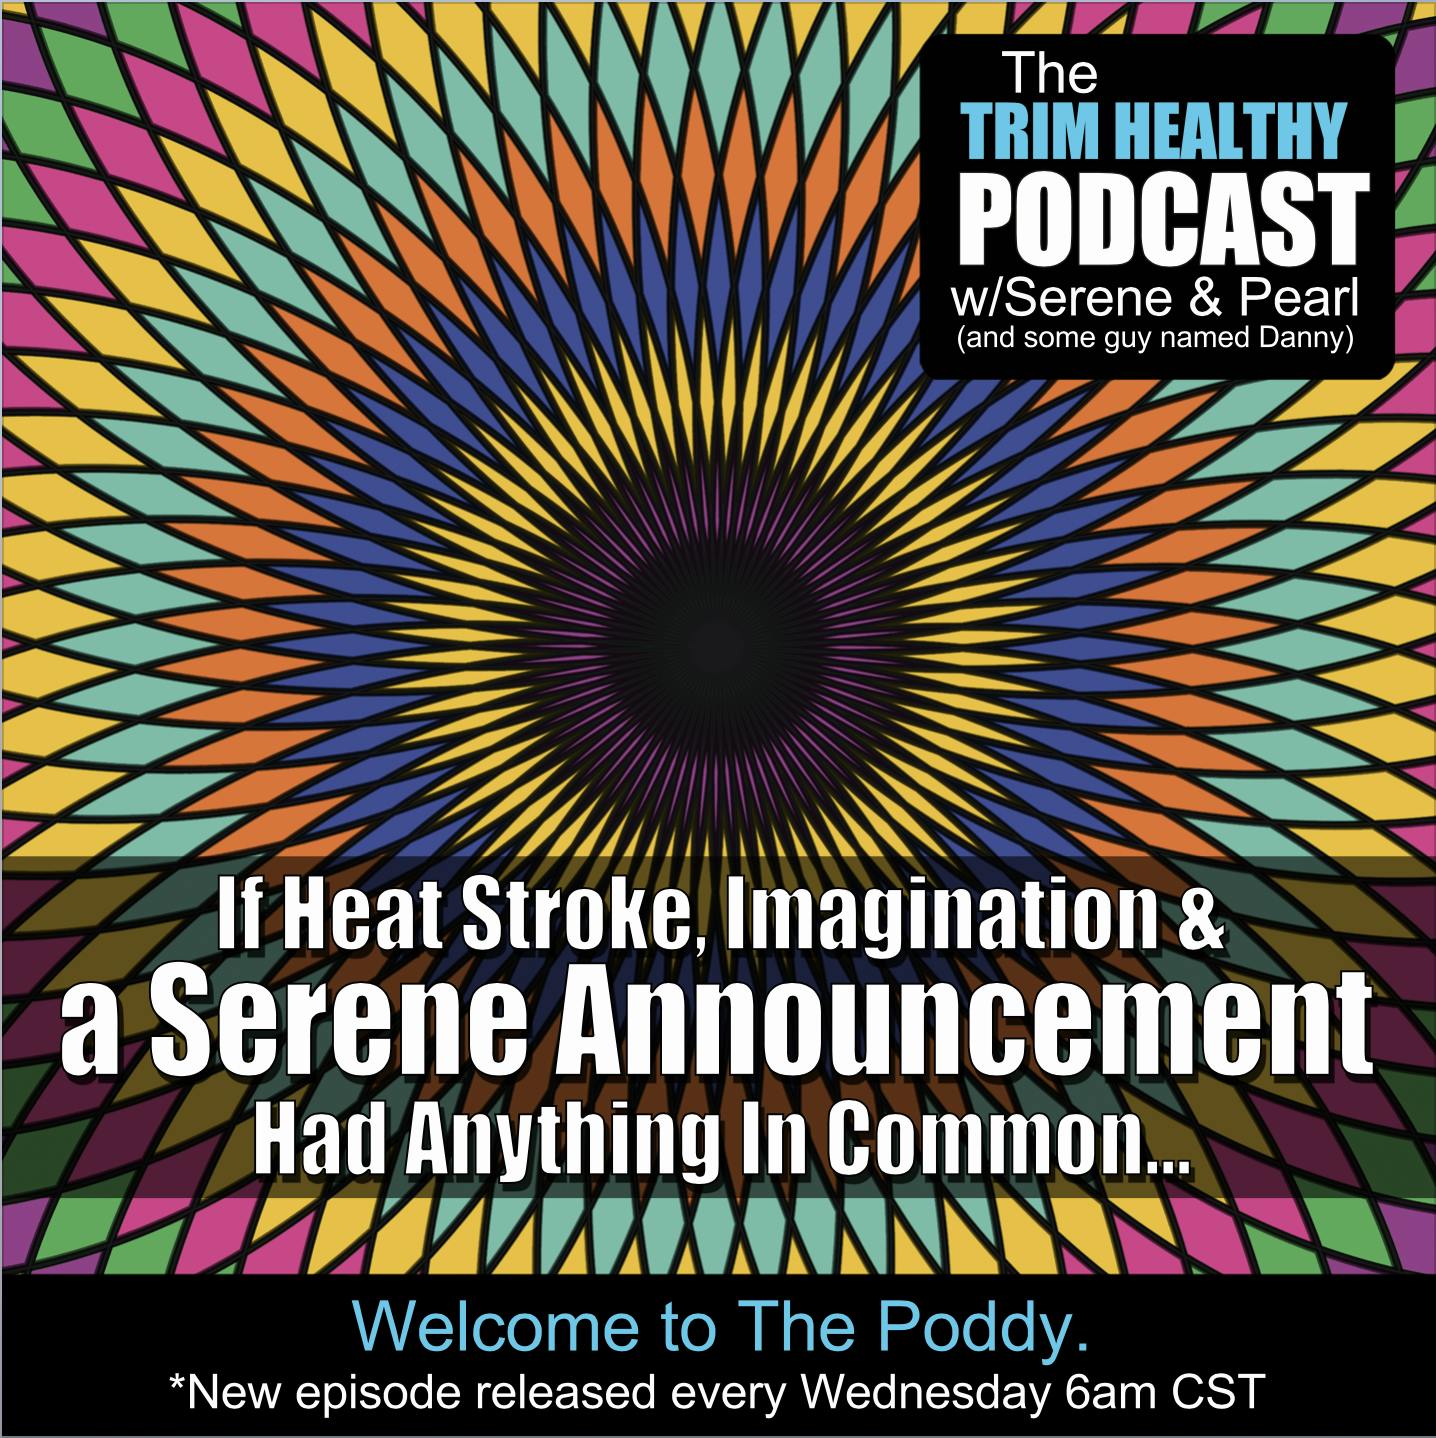 Ep 234: If Heat Stroke, Imagination & a Serene Announcement Had Anything In Common...